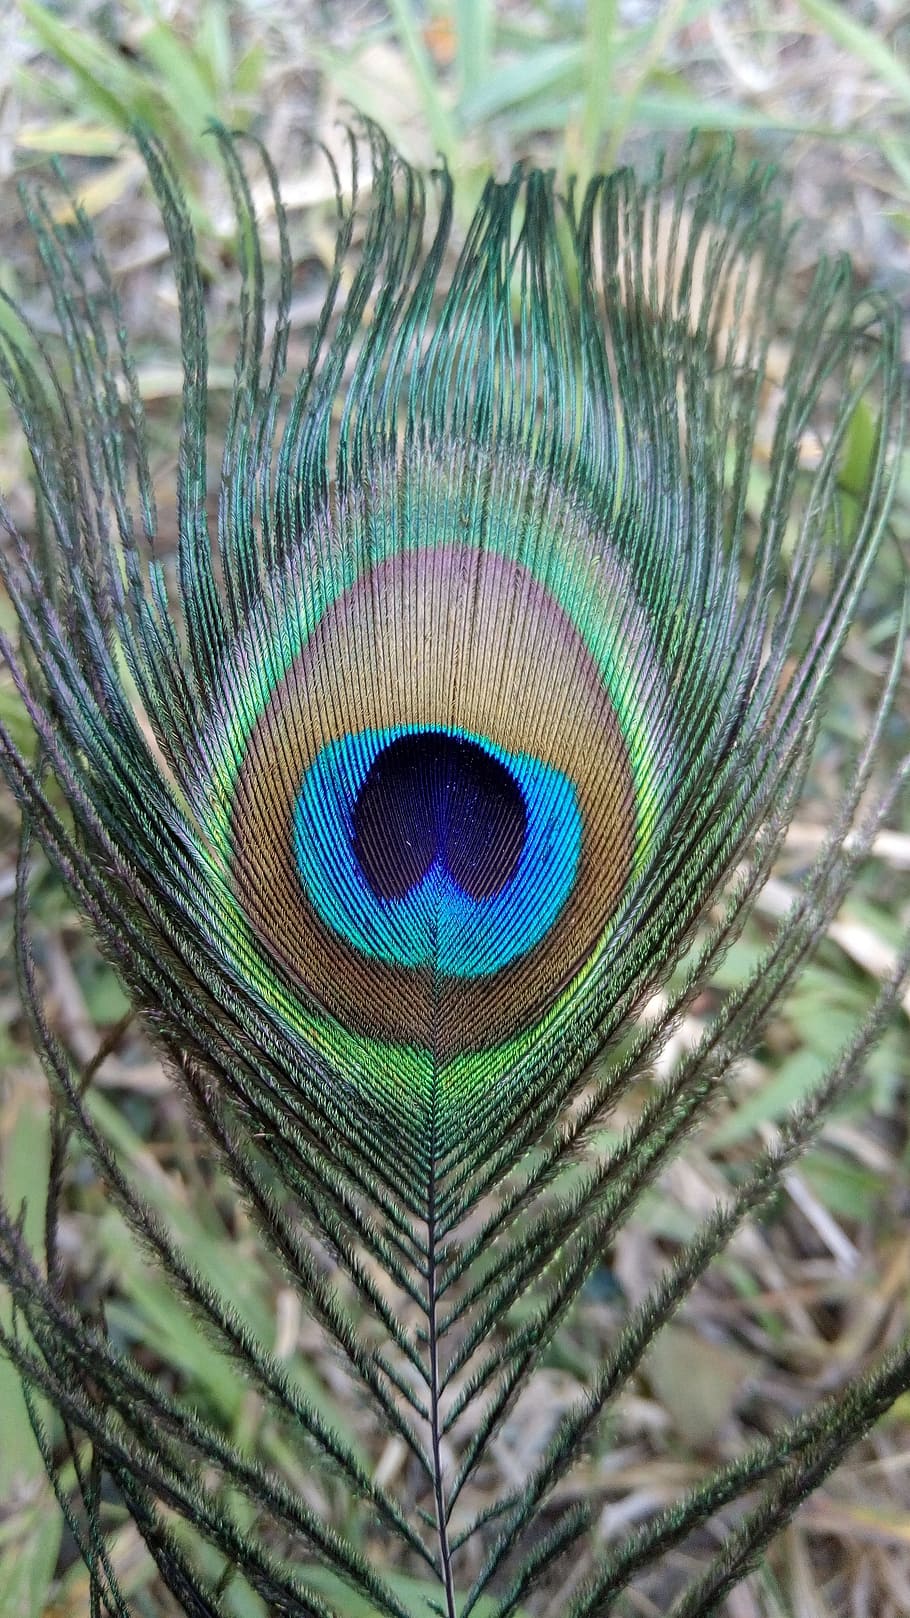 bird, feather, peacock, pattern, nature, color, beautiful, bright, outdoors, animal